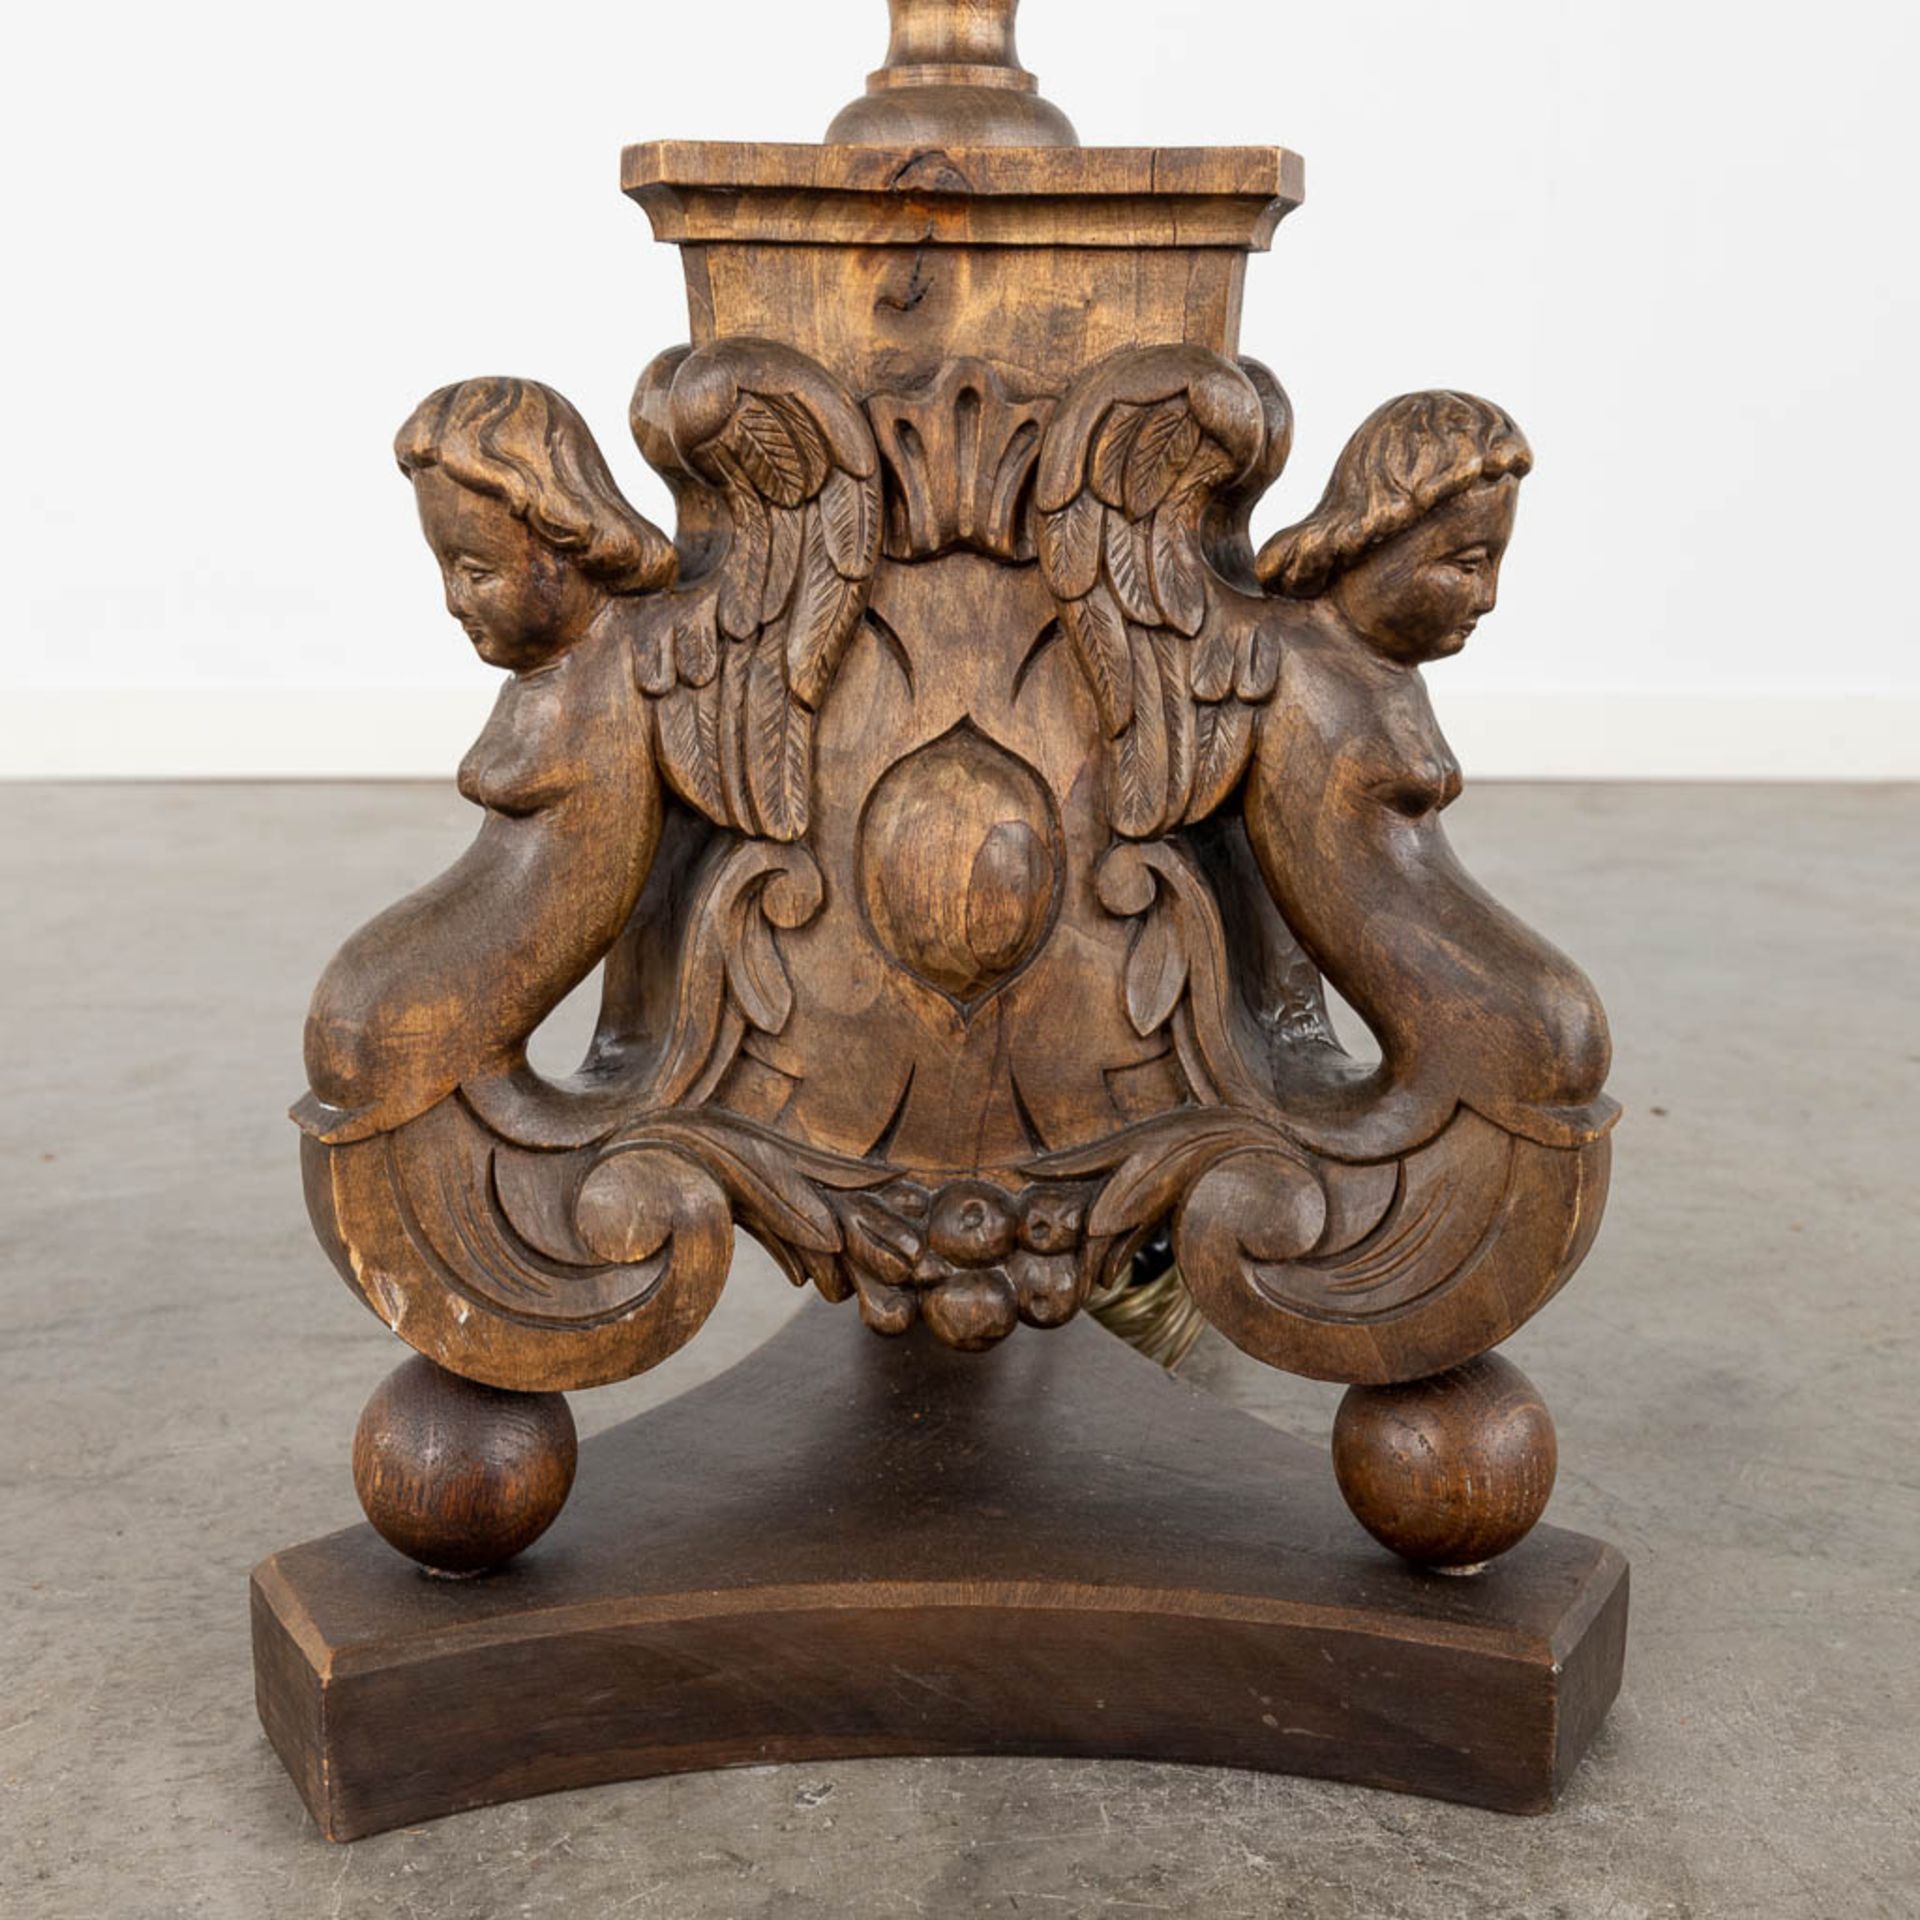 A wood-sculptured lamp base or candle holder, decorated with angels. (H:121 x D:23 cm) - Image 6 of 12